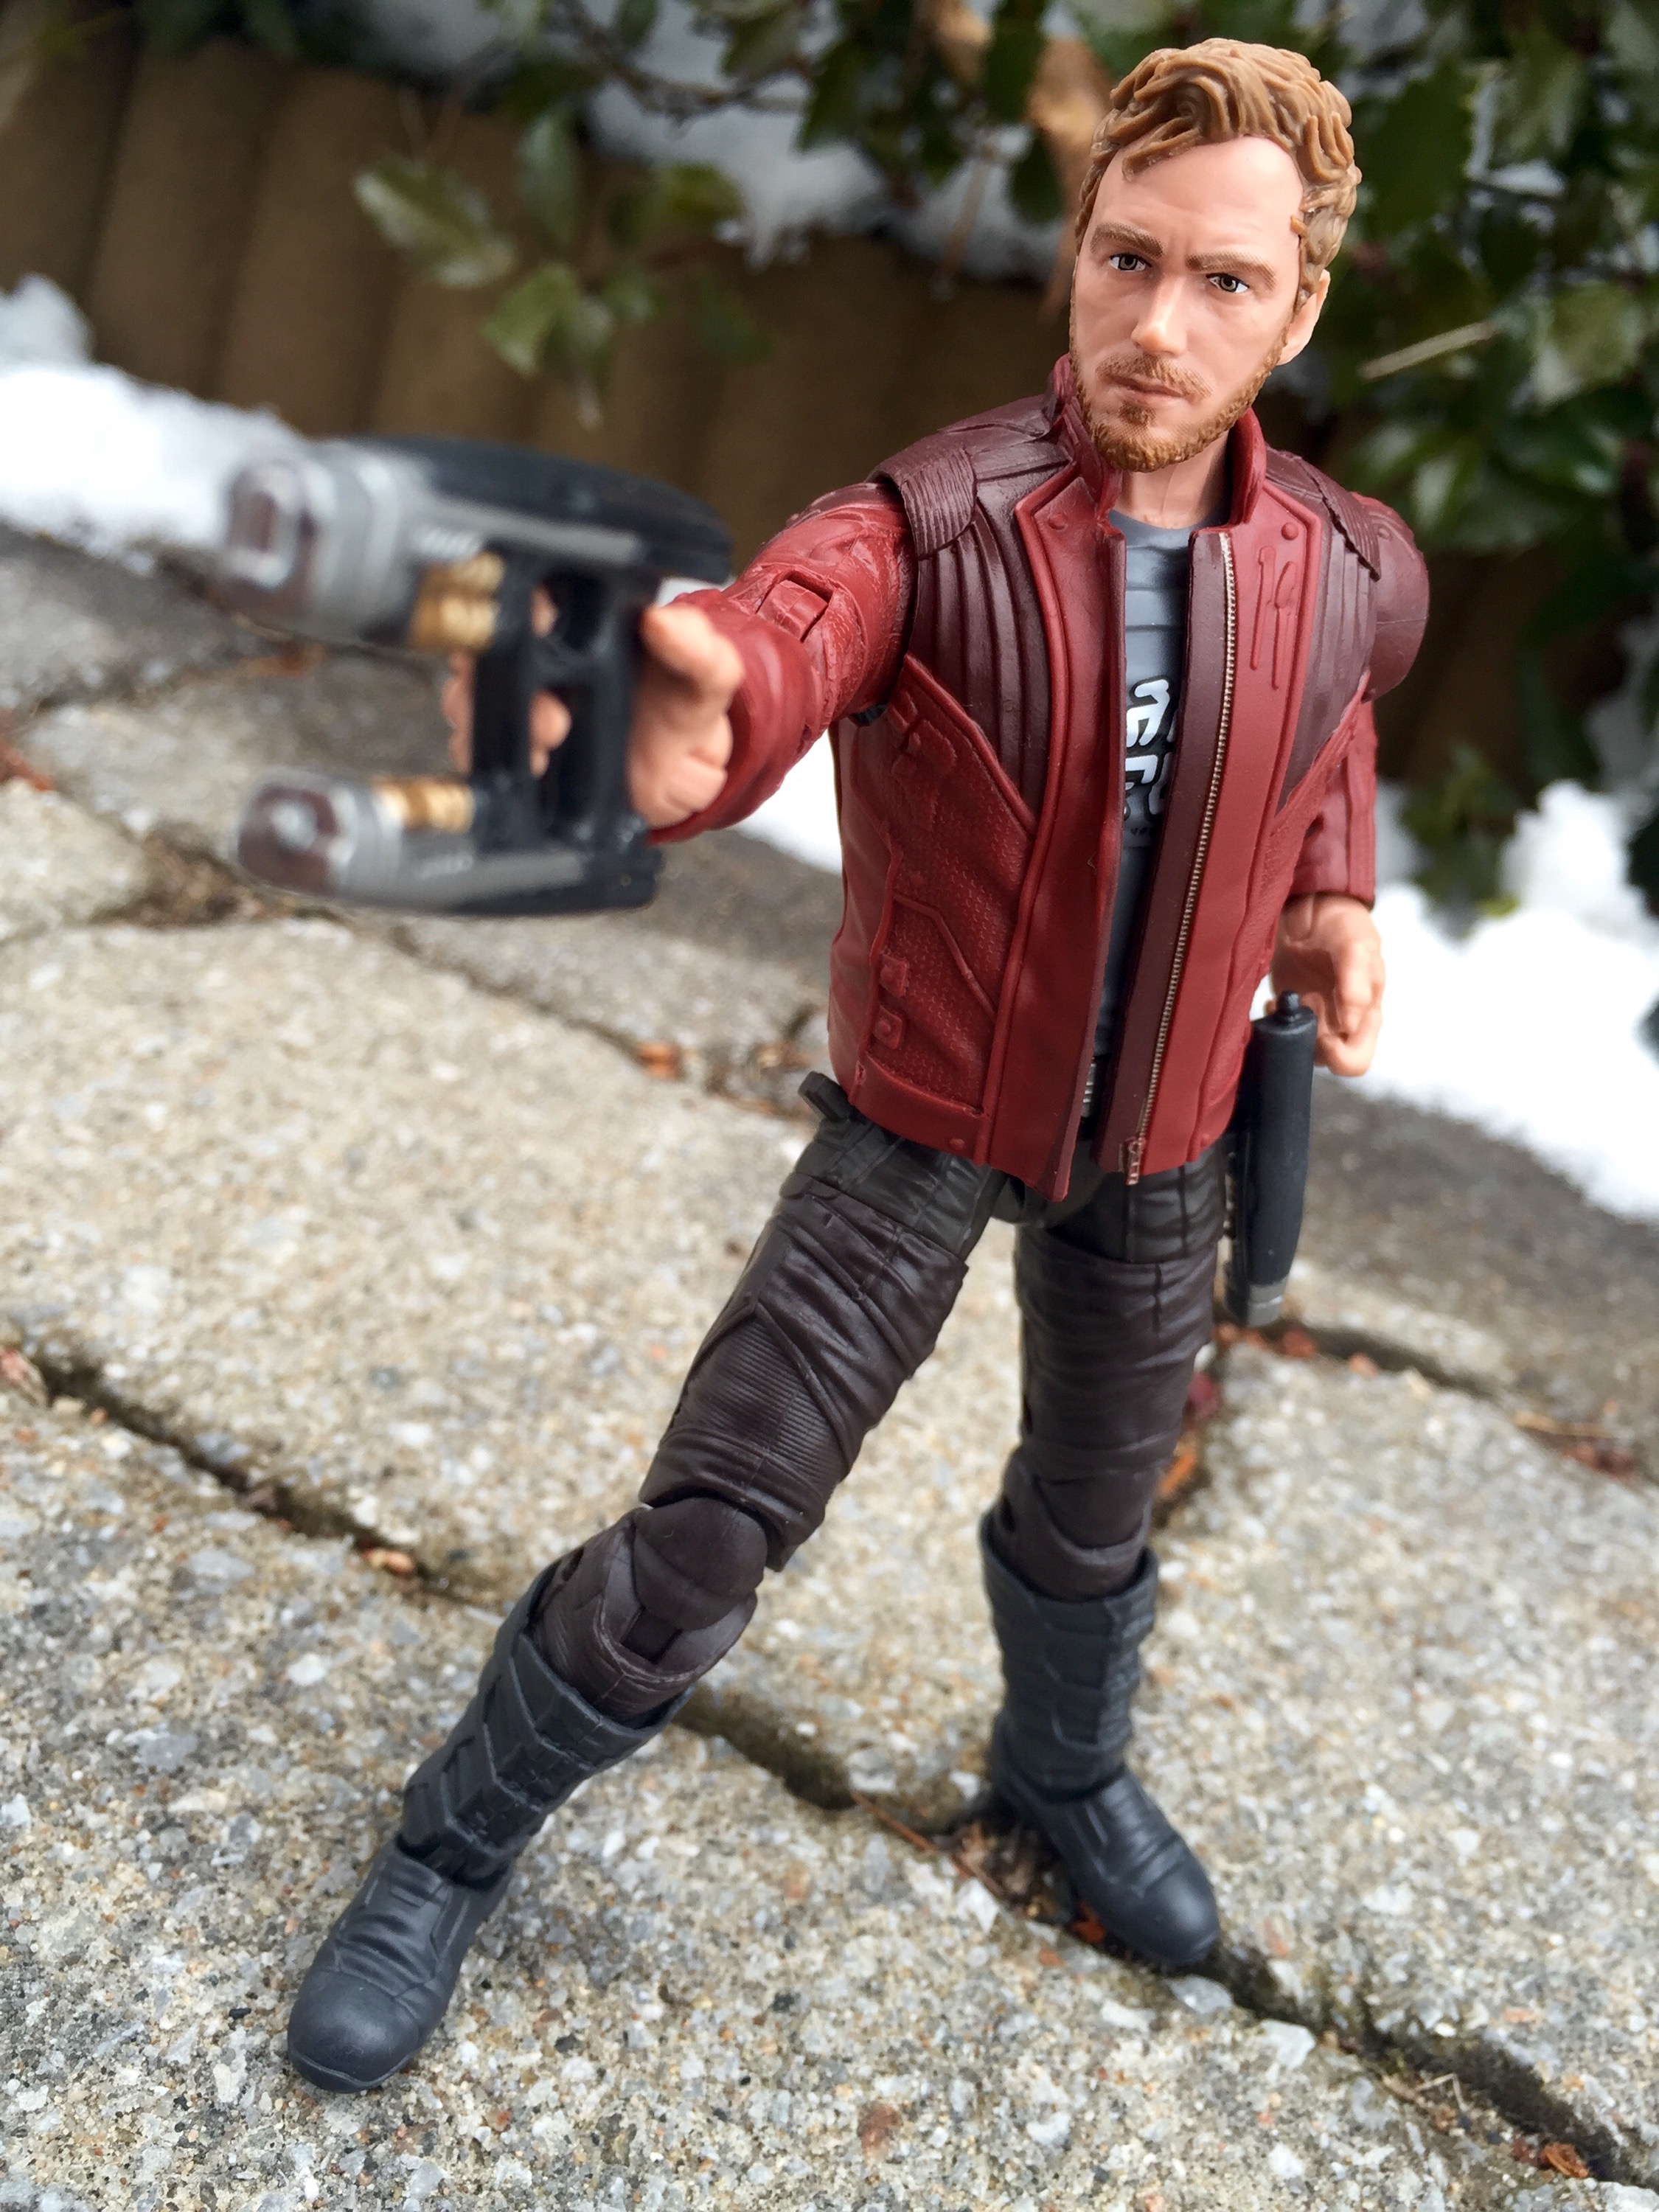 2017 Marvel Legends StarLord 6" Figure Review GOTG Vol. 2